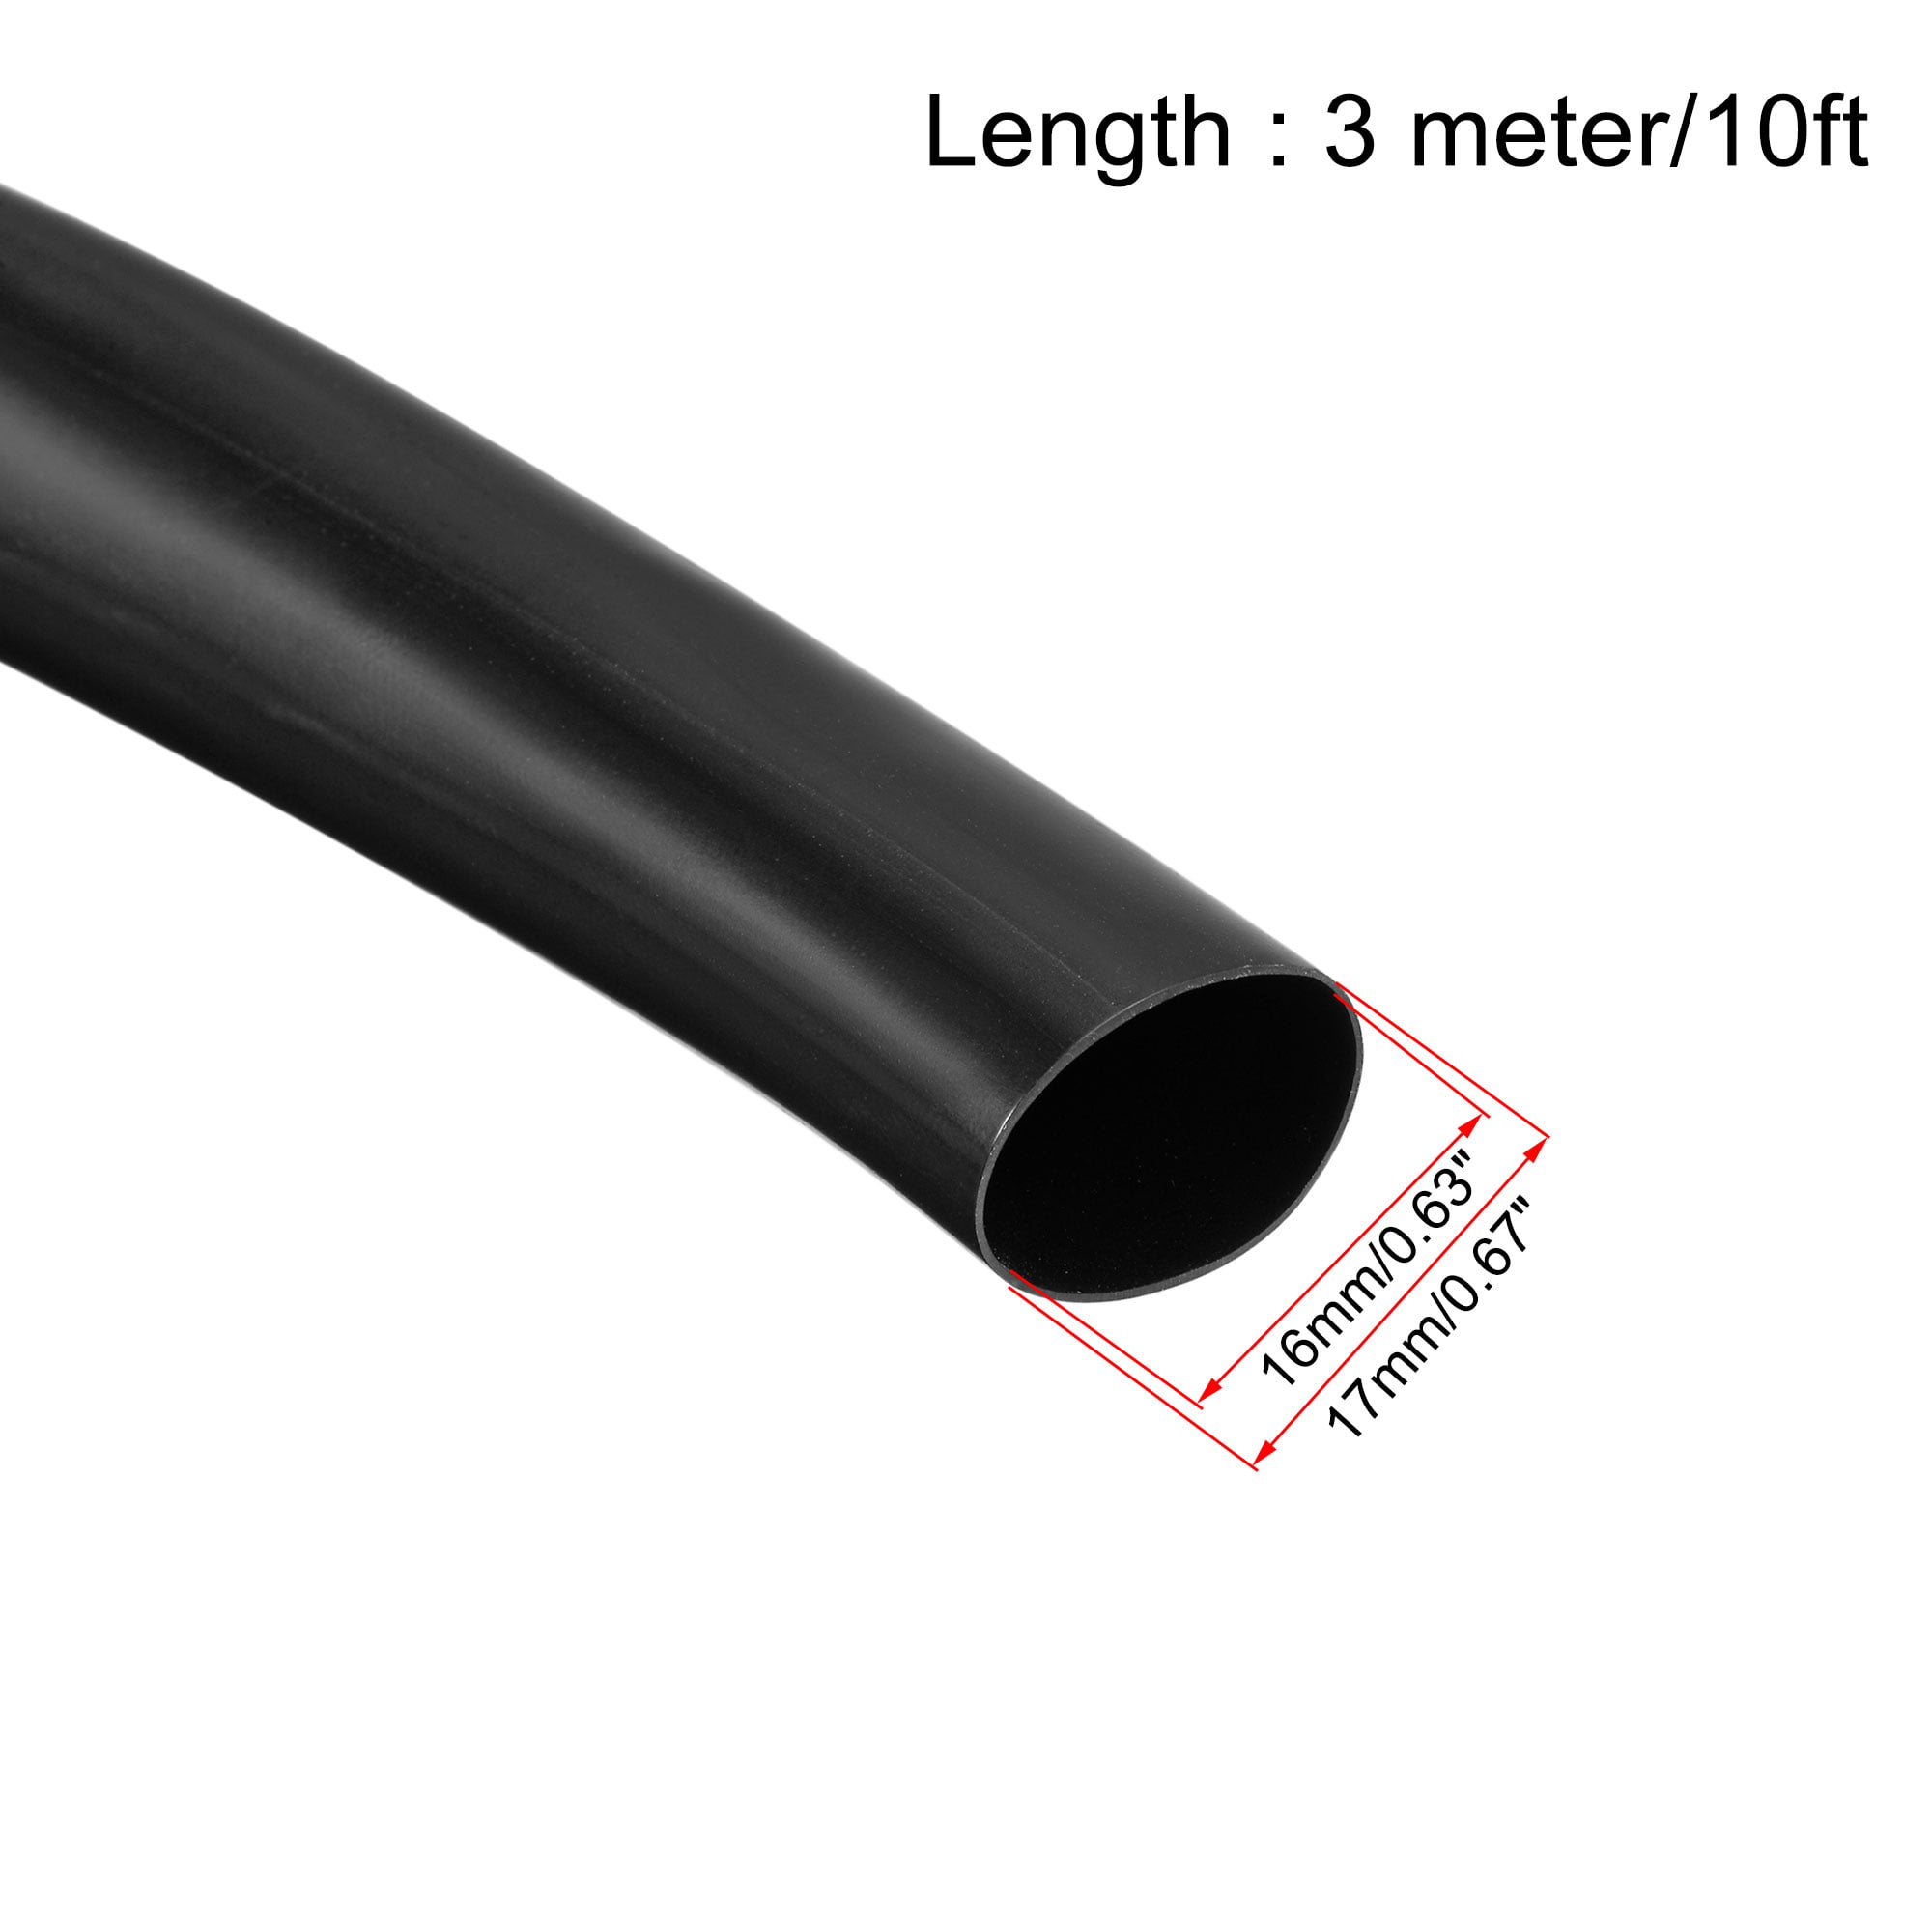 PVC Black Tube Sleeve For Wire 10 Feet Harness Wiring Loom Cover Wire Protection & More Tubing Loom Flexible Sheathing OEM Type 1/2 INCH 